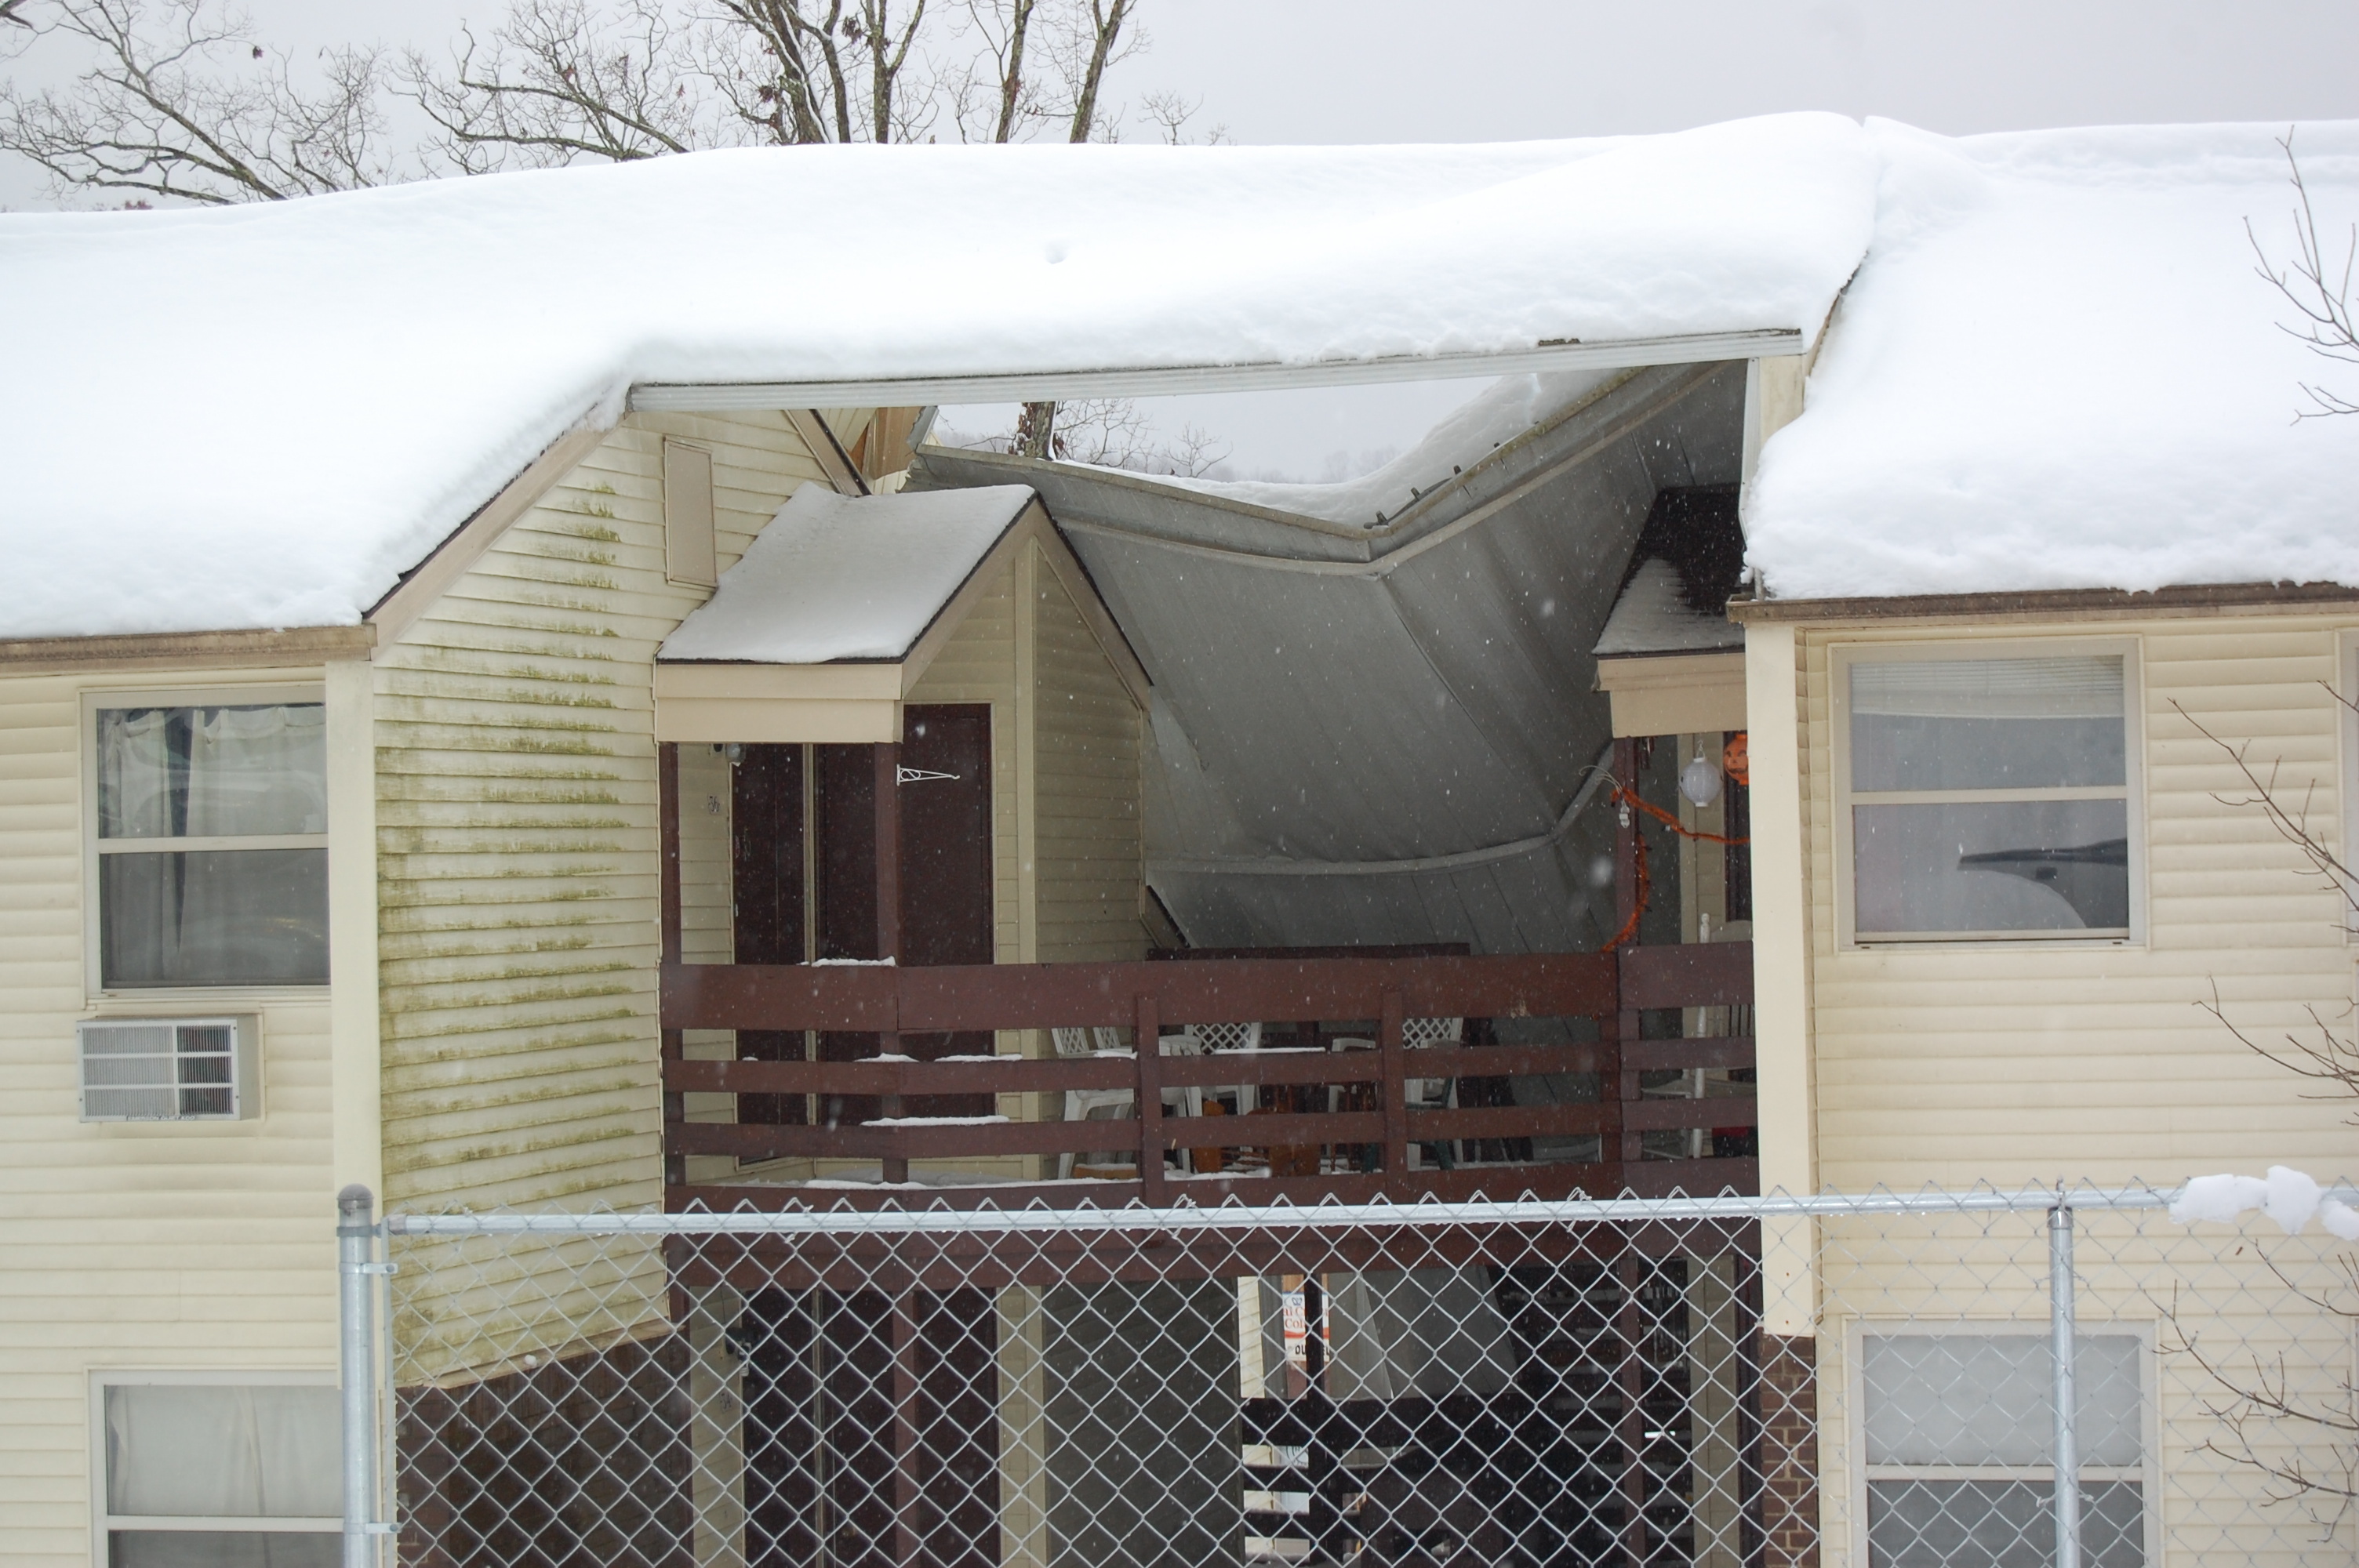 Members of the West Virginia Army National Guard traveled to an apartment complex in Summersville, W.Va., to assess the structural damage incurred after Hurricane Sandy brought over two feet of snow to the mountainous region. Soldiers assigned to